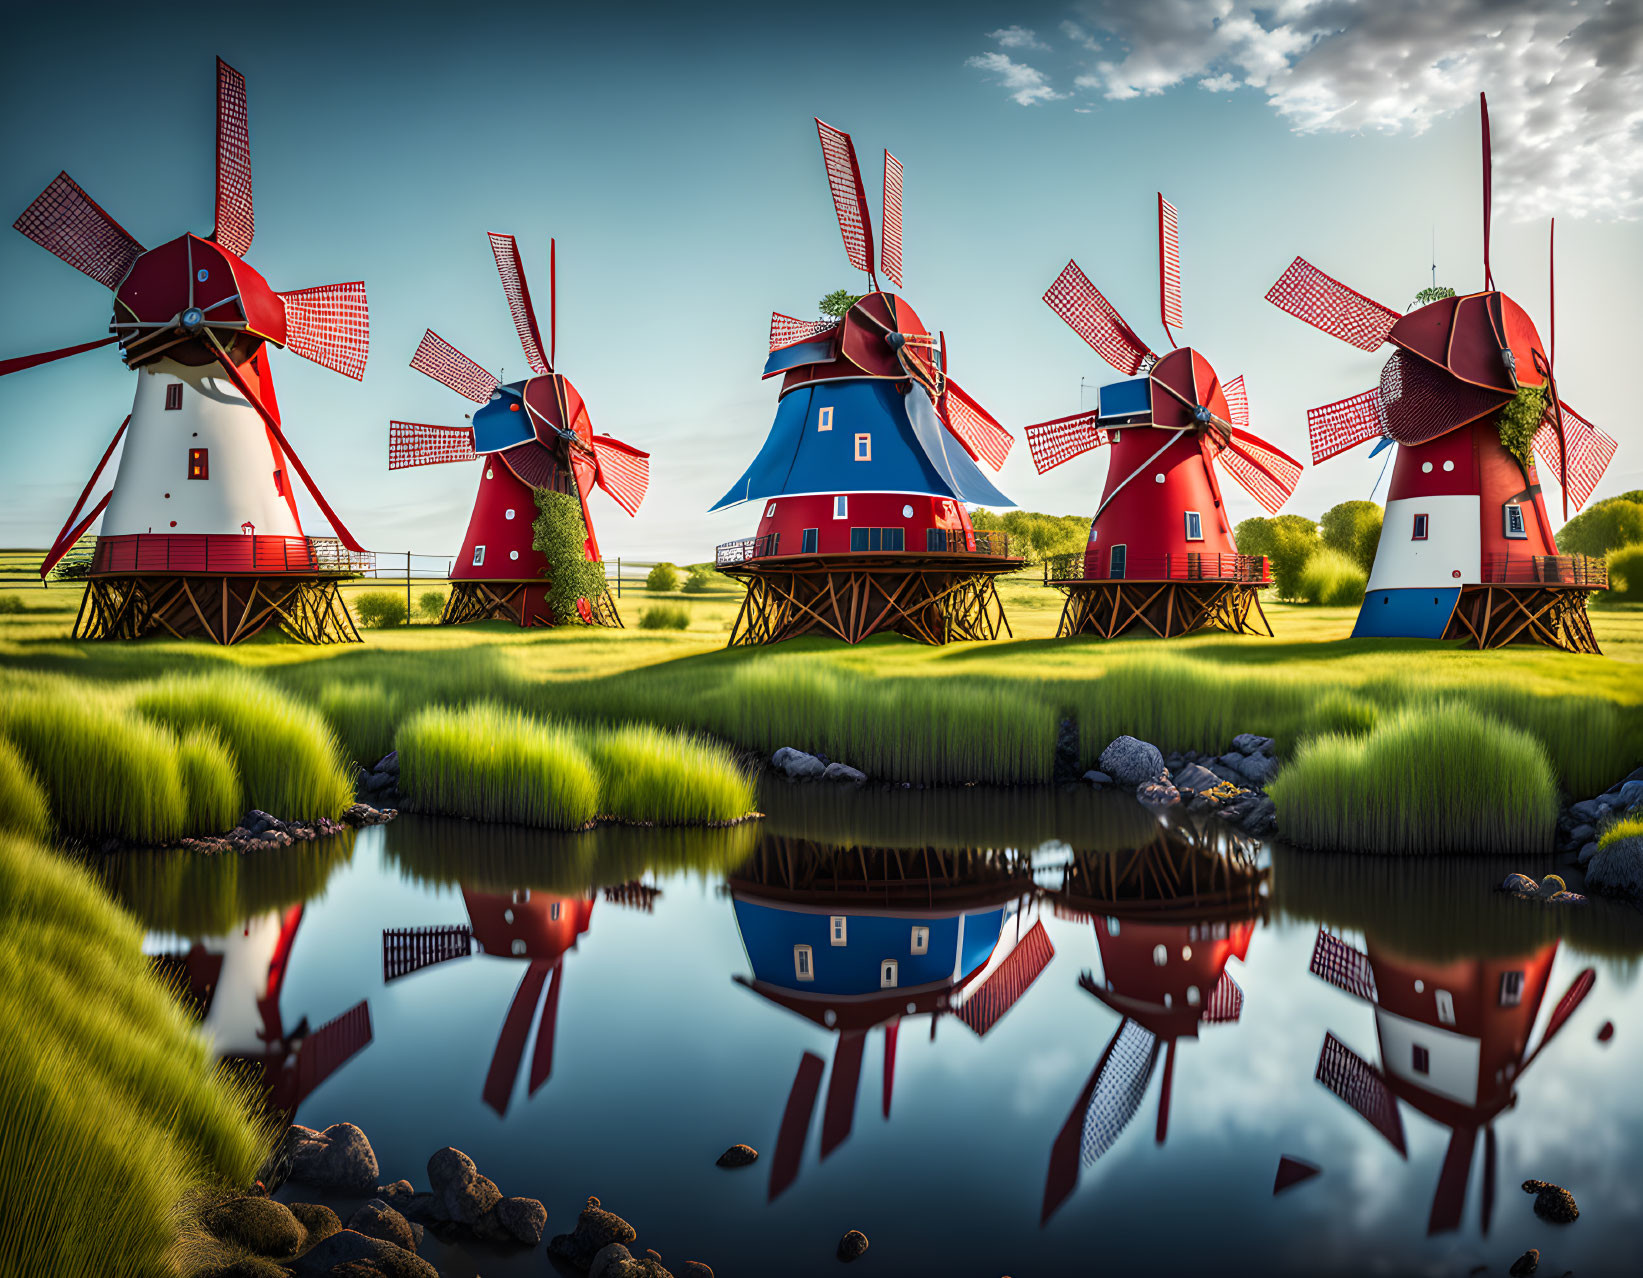 Scenic red and white windmills by a serene lake in lush green setting